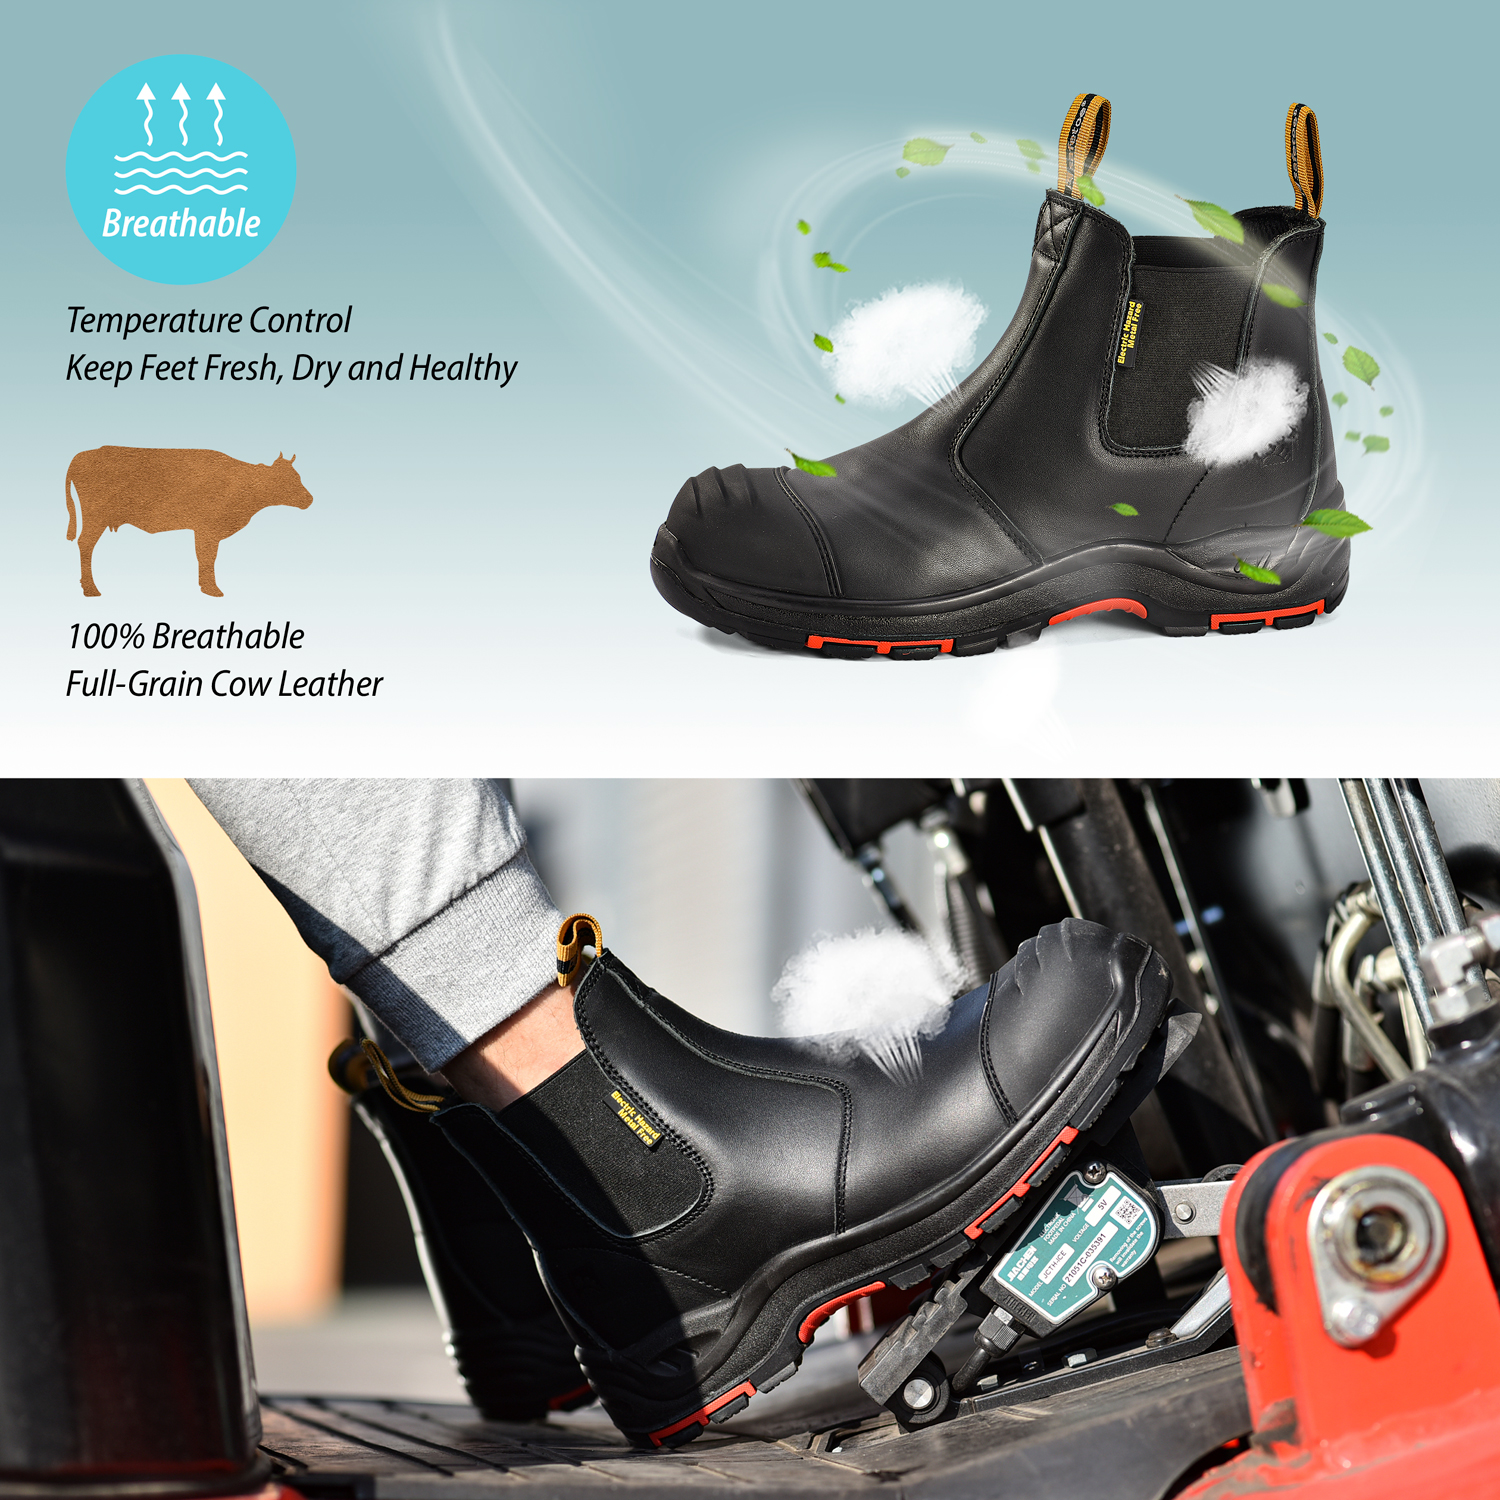 Ready Stock Black Leather Safety Boots for Men And Women M-8025NBK